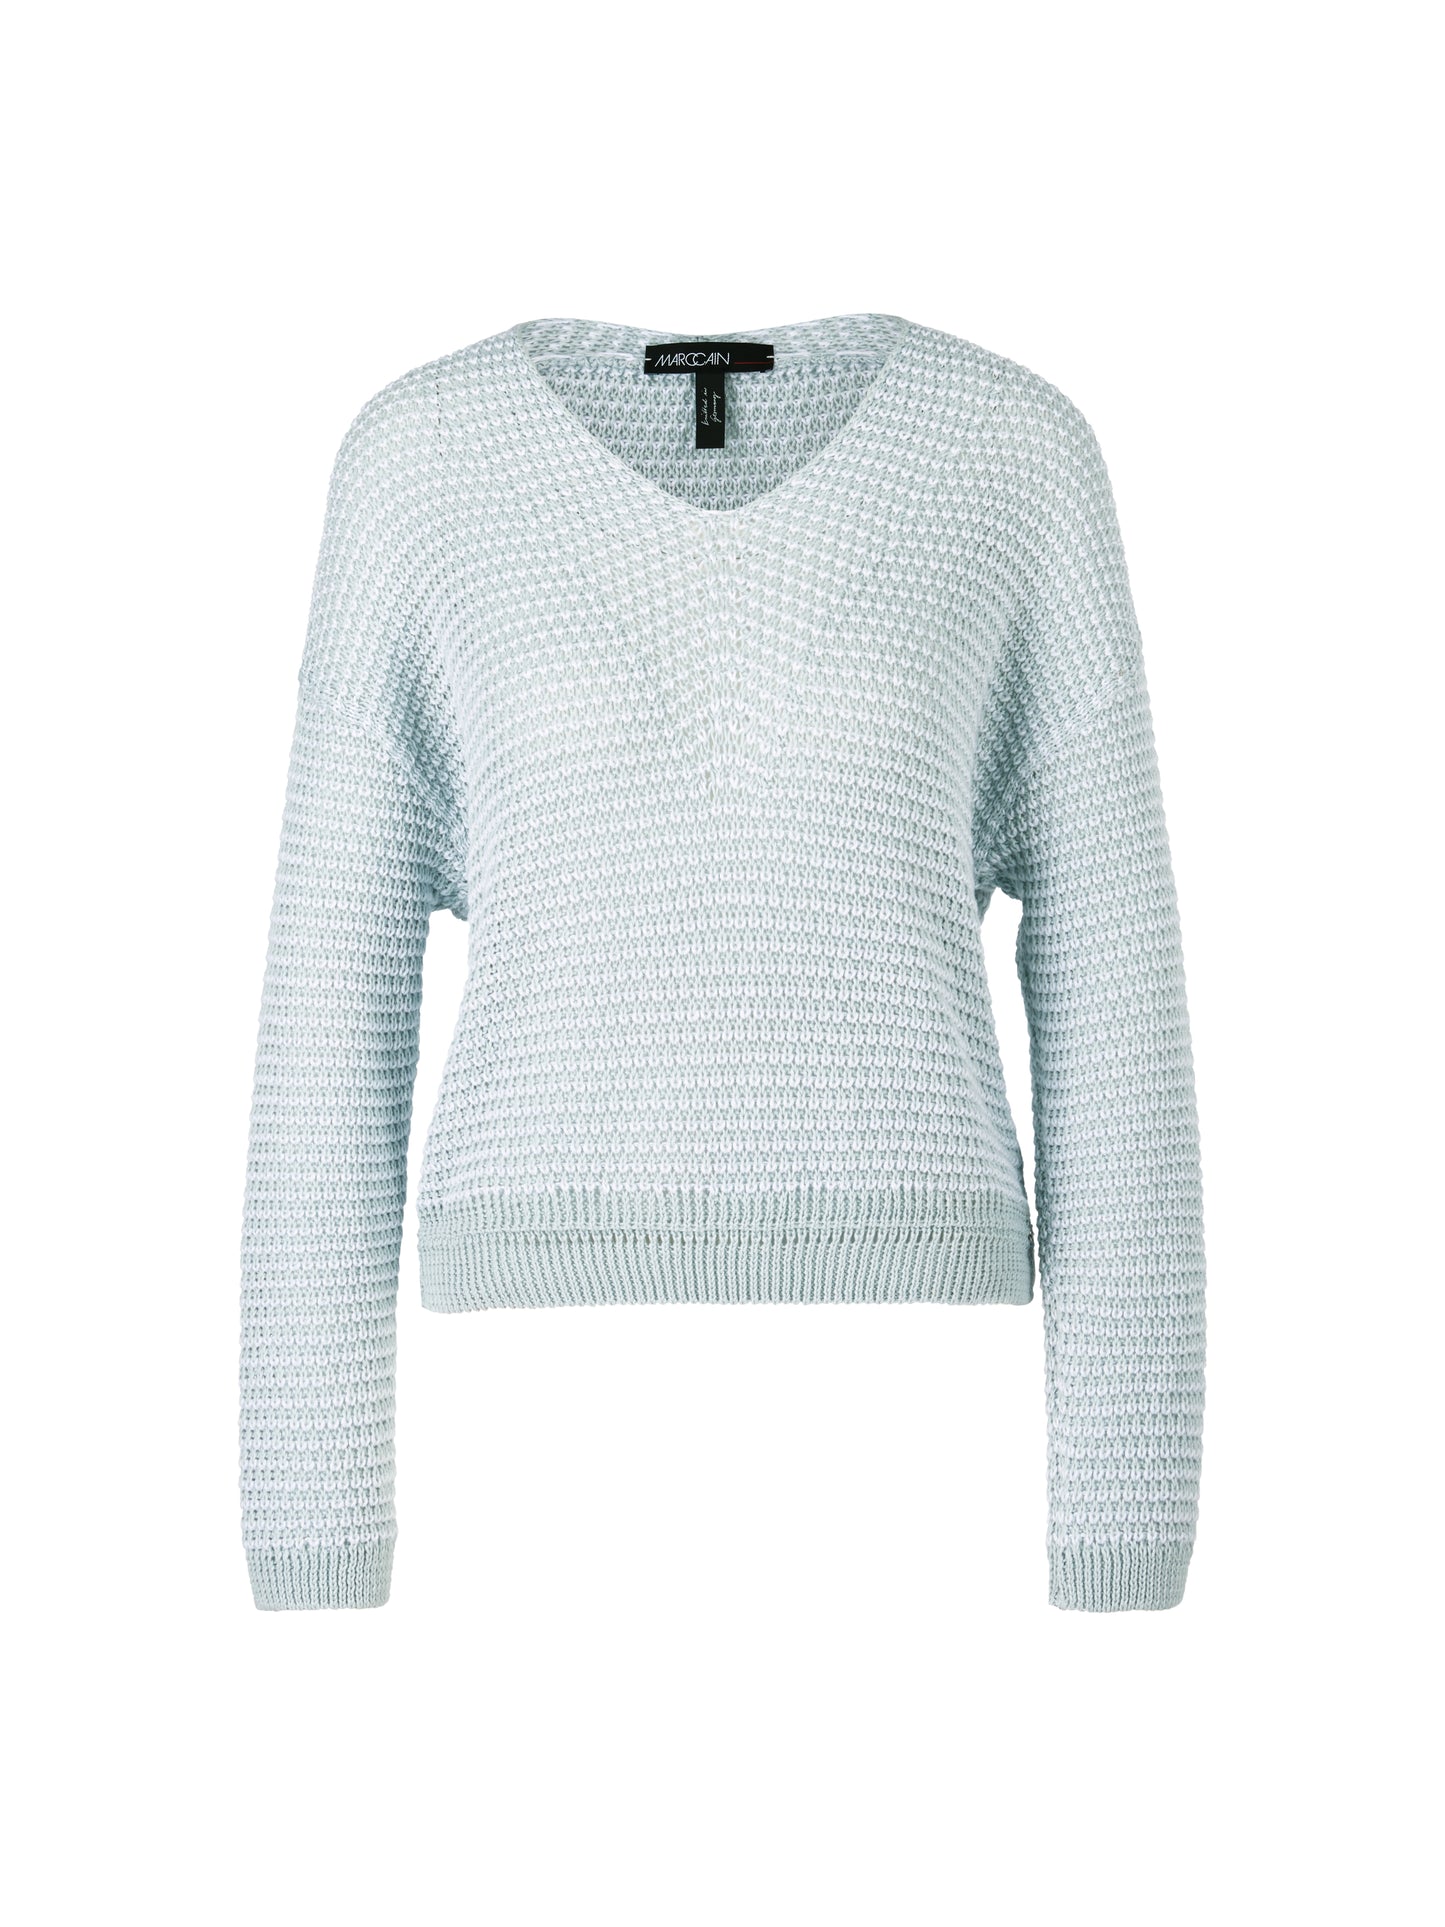 Marc CainCollection WC4142M43 textured cotton sweater